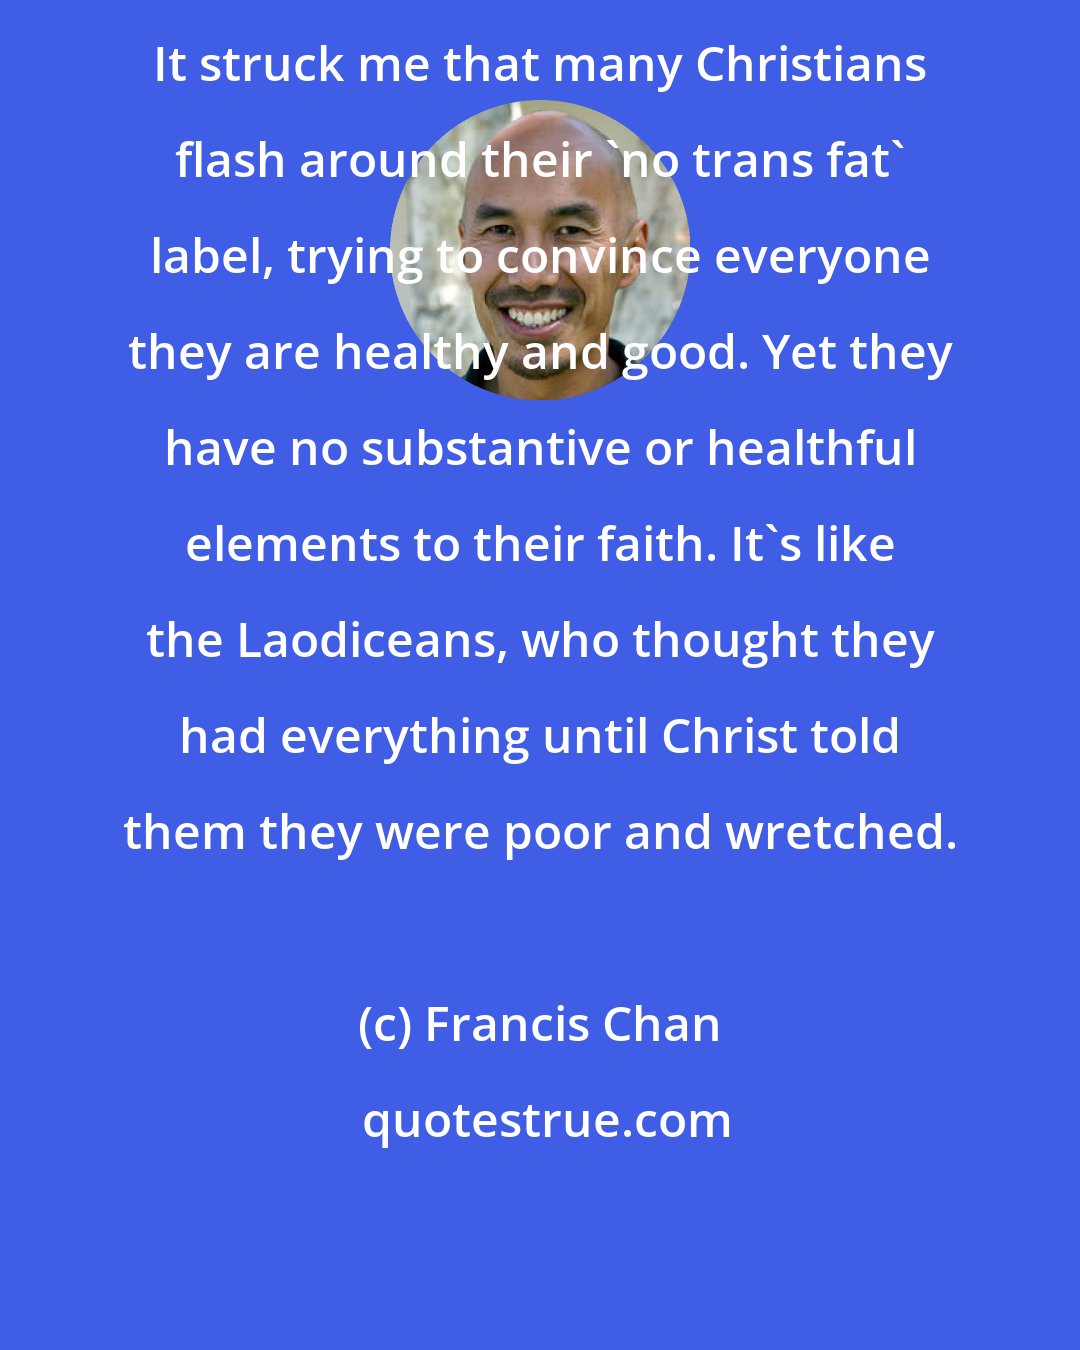 Francis Chan: It struck me that many Christians flash around their 'no trans fat' label, trying to convince everyone they are healthy and good. Yet they have no substantive or healthful elements to their faith. It's like the Laodiceans, who thought they had everything until Christ told them they were poor and wretched.